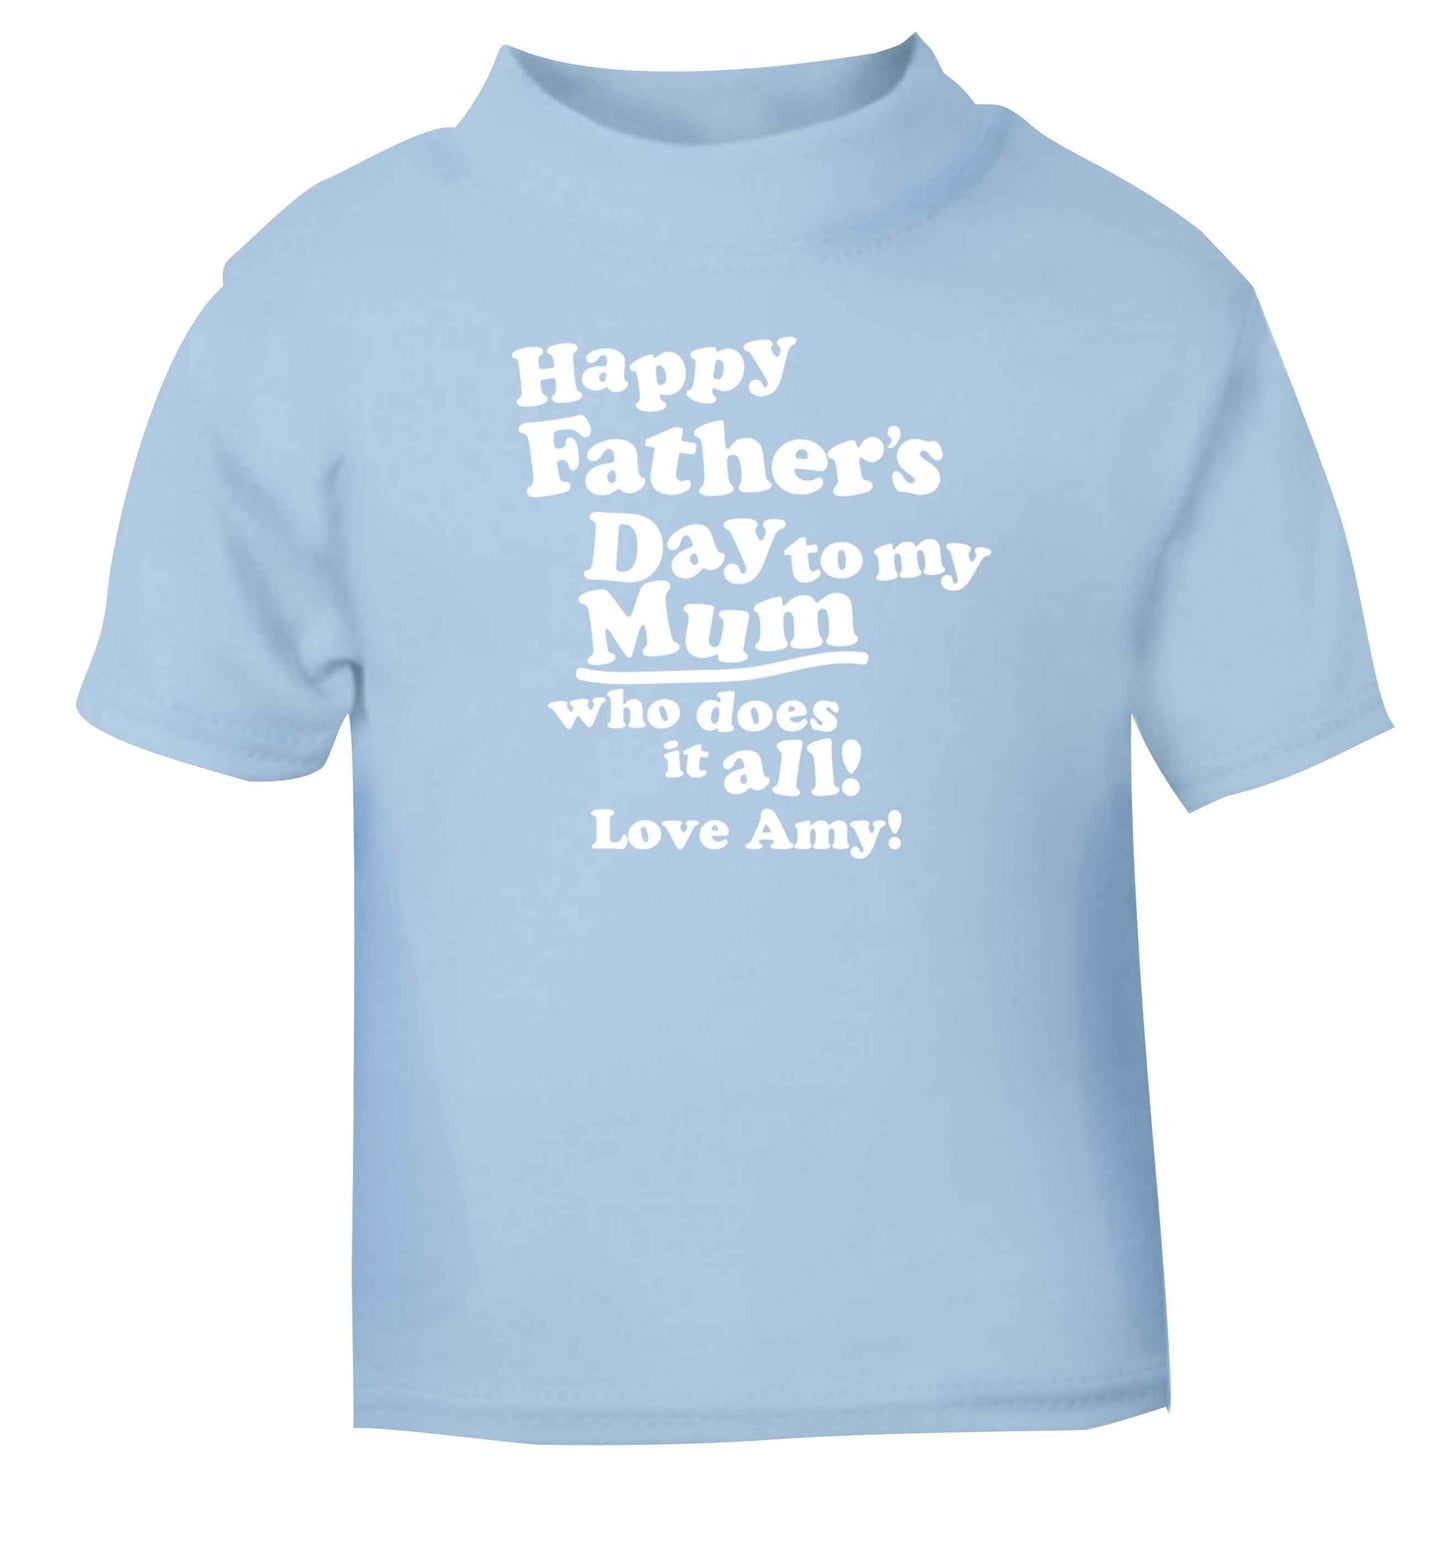 Happy Father's day to my mum who does it all light blue baby toddler Tshirt 2 Years